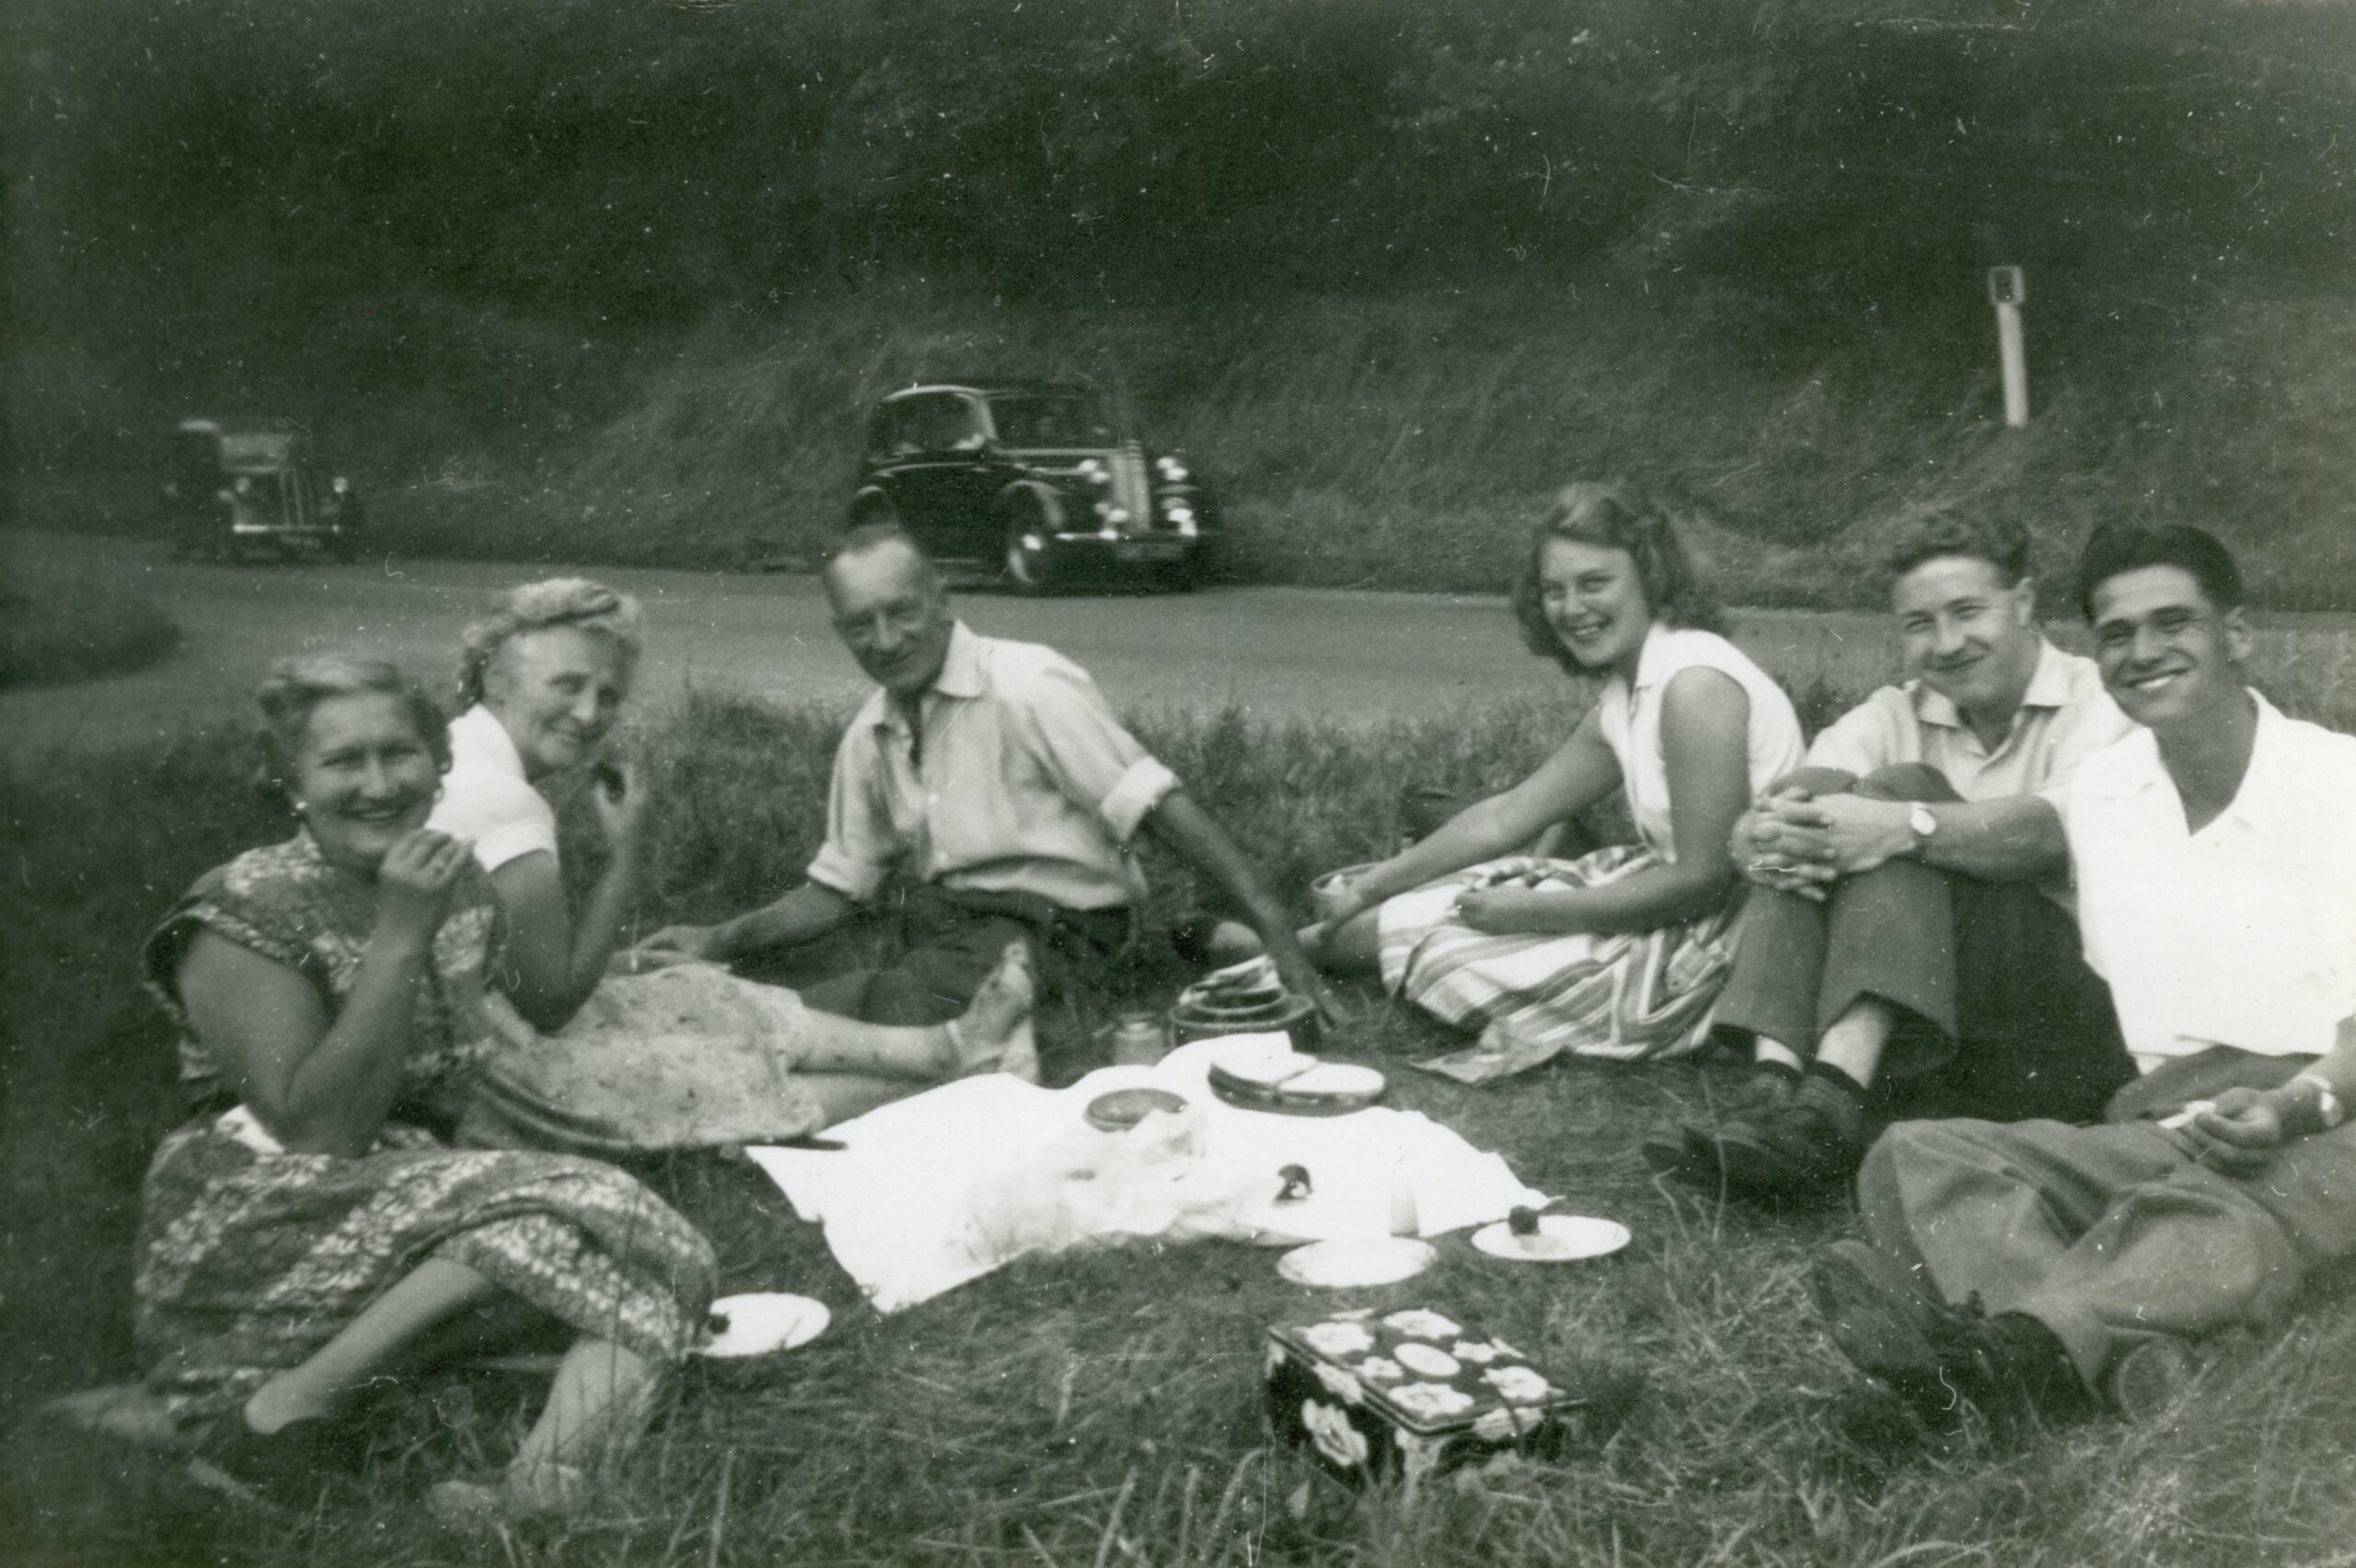 Image from the 1960's of people having a picnic